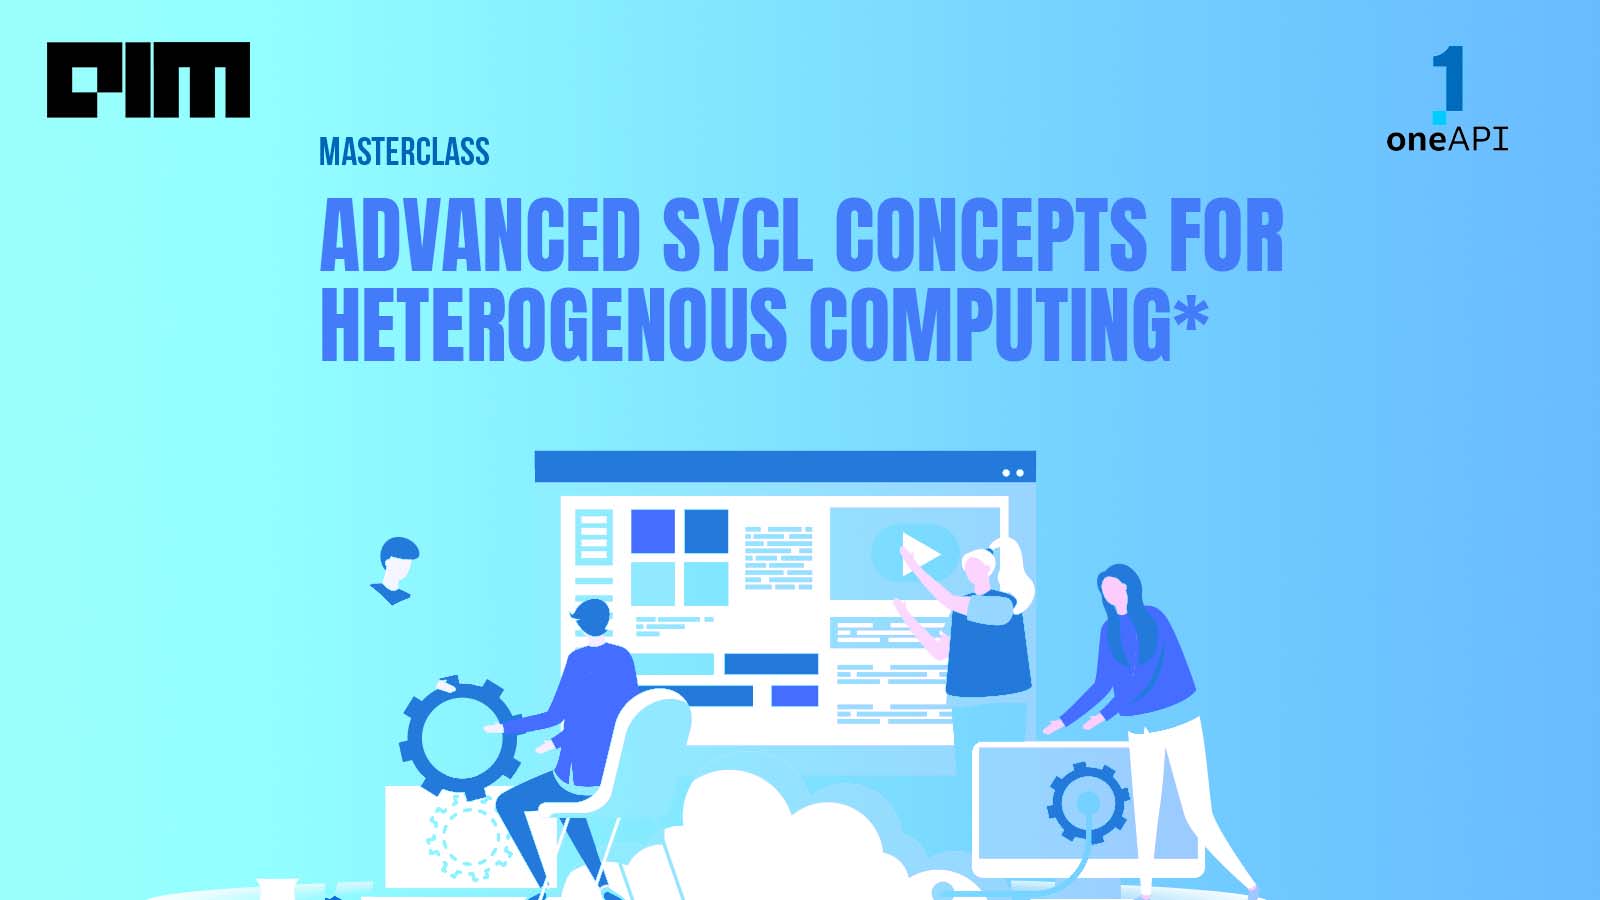 Did you miss the Intel® oneAPI Workshop on advanced SYCL concepts for heterogeneous computing*? Here’s what you need to know